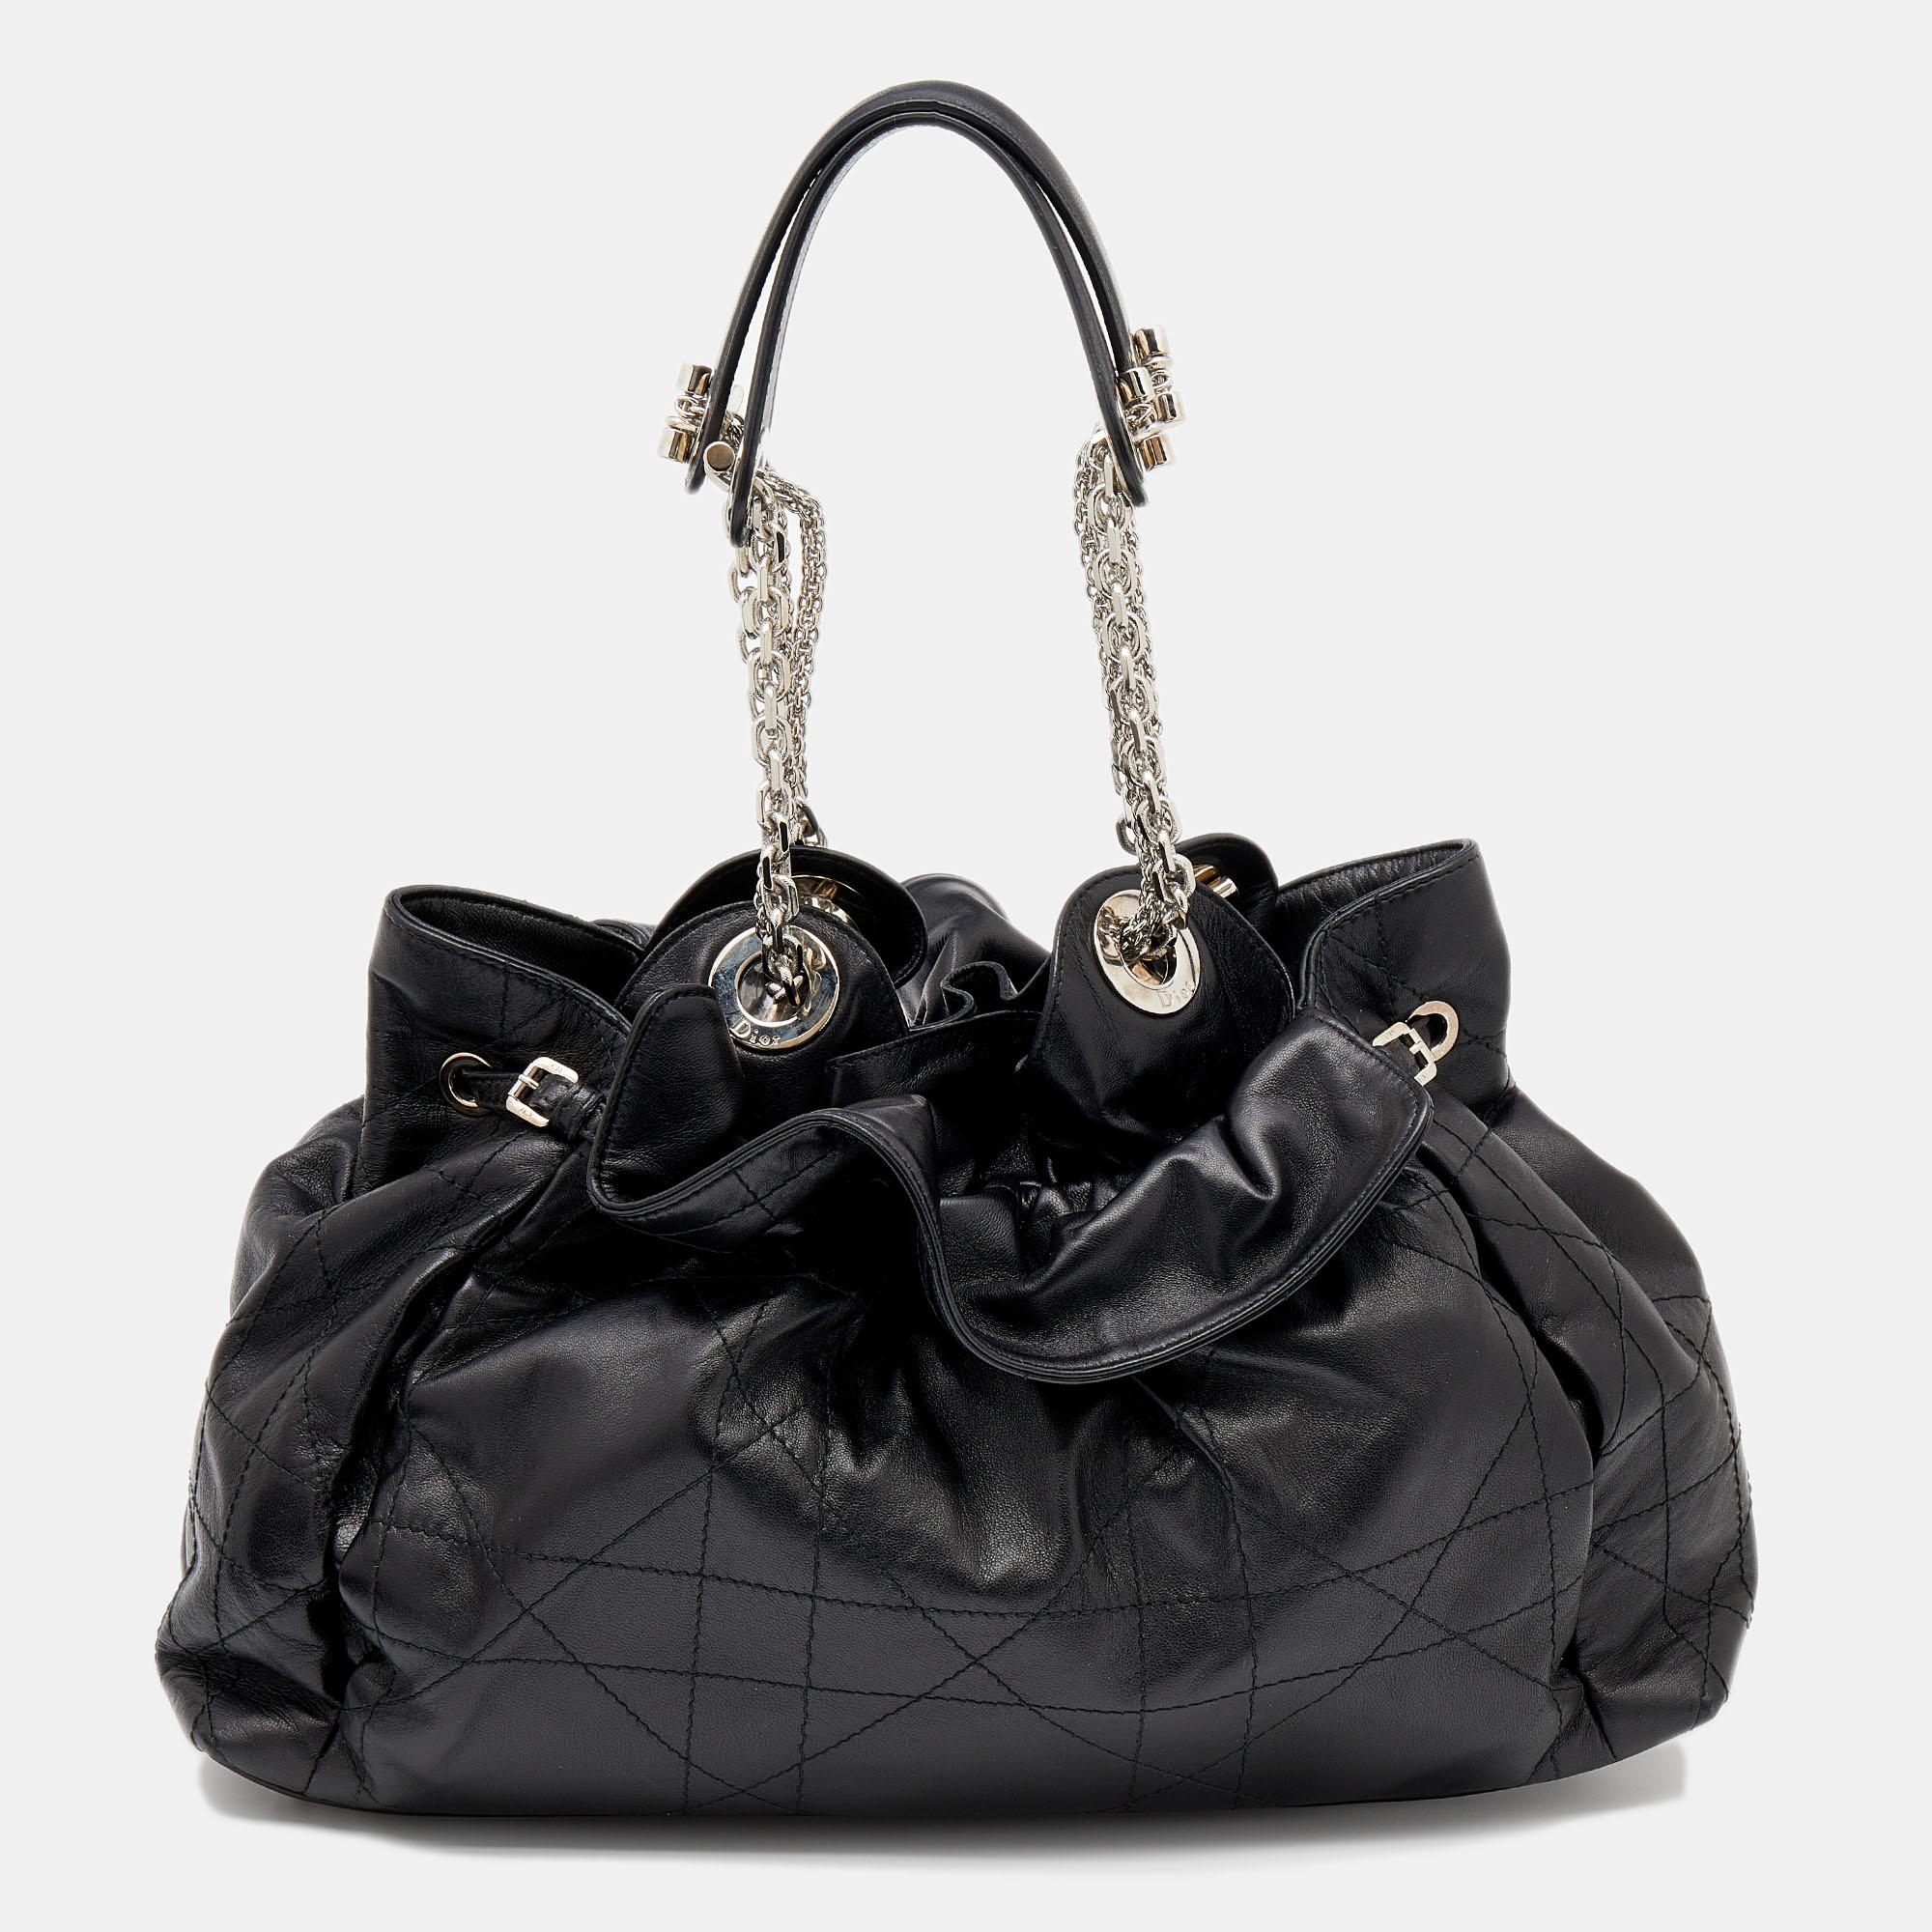 This stylish Le Trente hobo from Dior has been crafted from black leather and covered with the signature Cannage motif. The bag features dual chain-leather handles, a 'CD' cutout charm, a drawstring closure, and protective metal feet. The insides